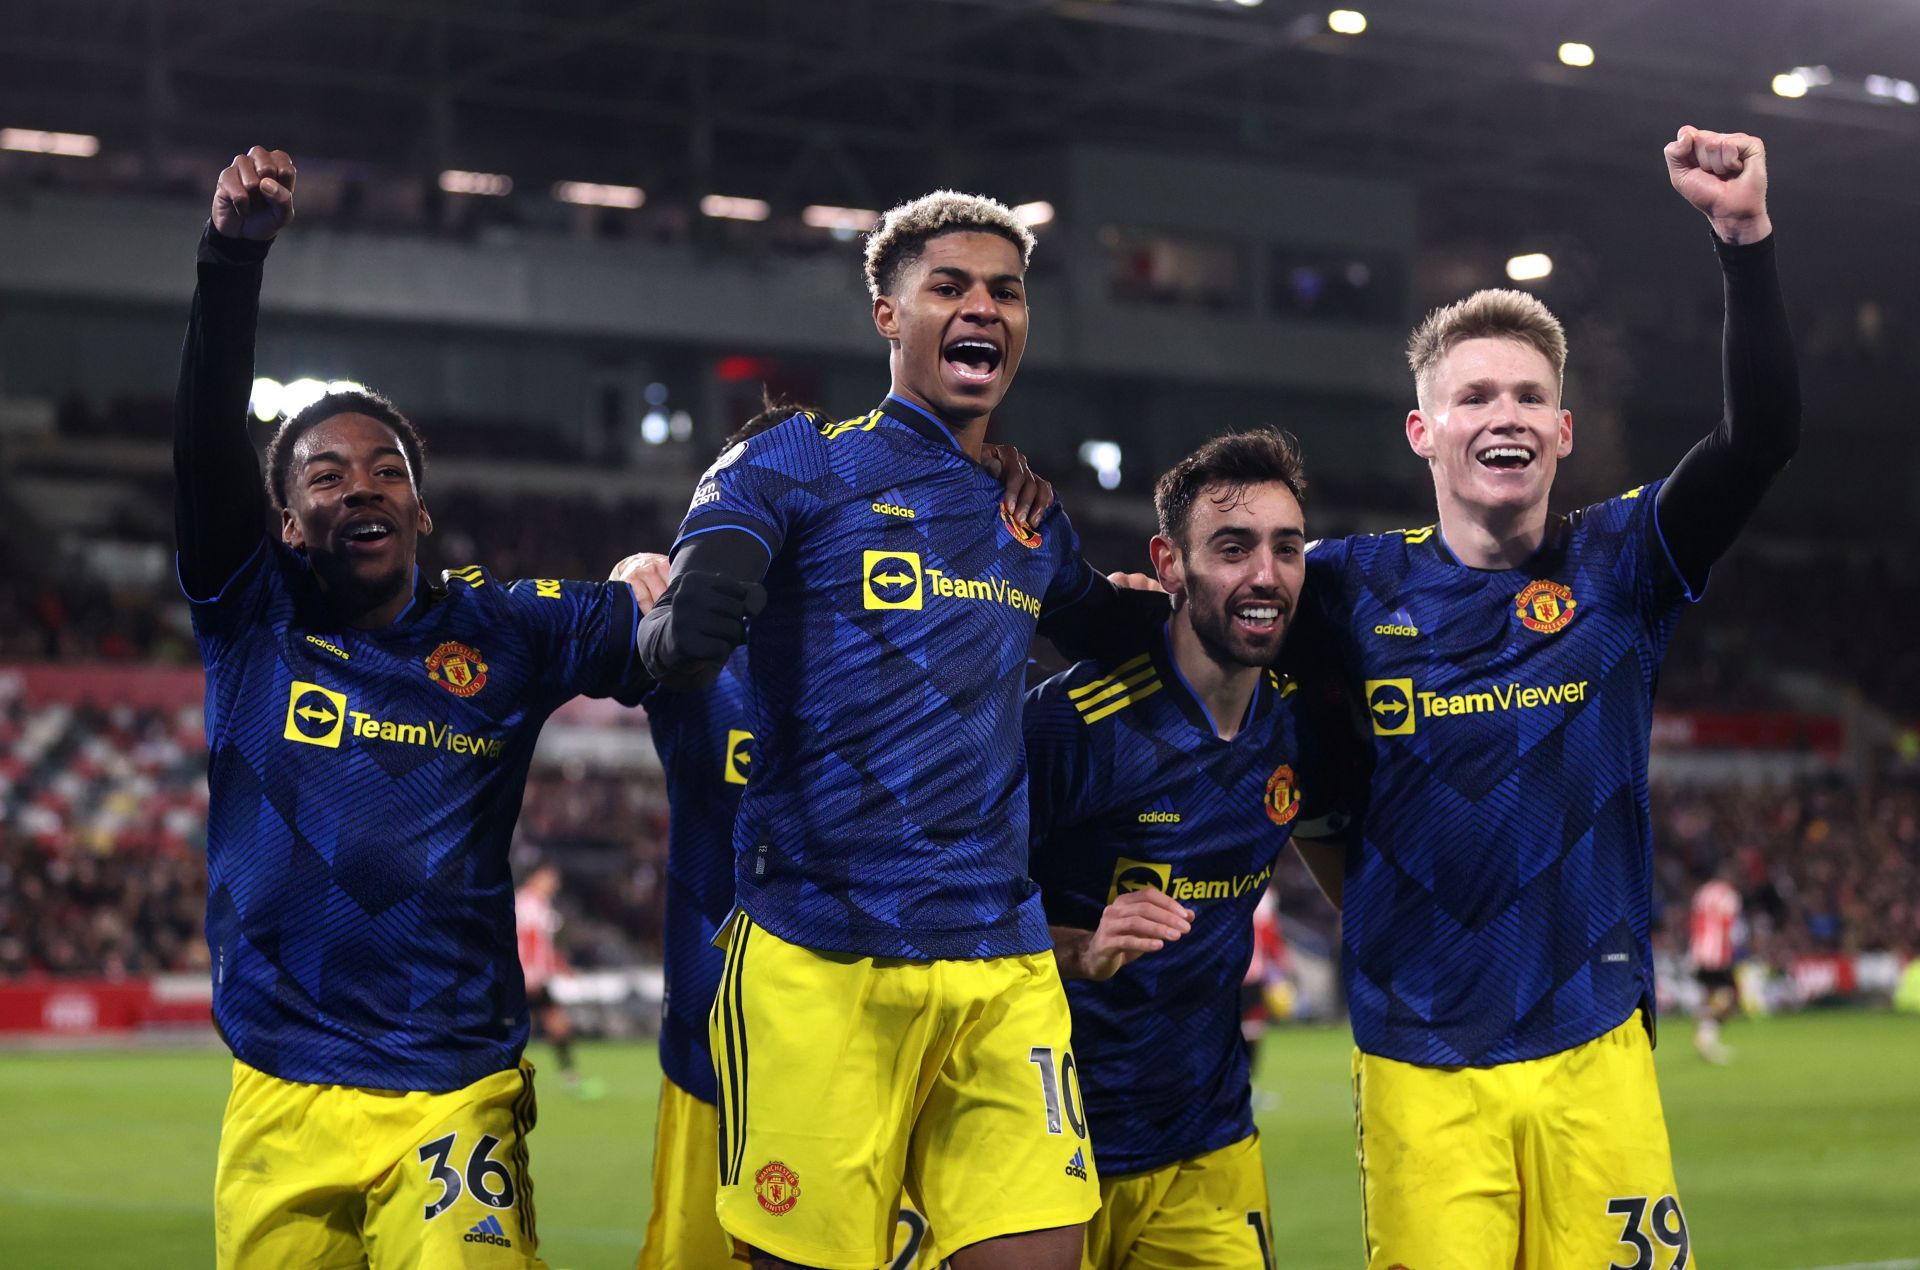 Manchester United secured a 3-1 away victory over Brentford